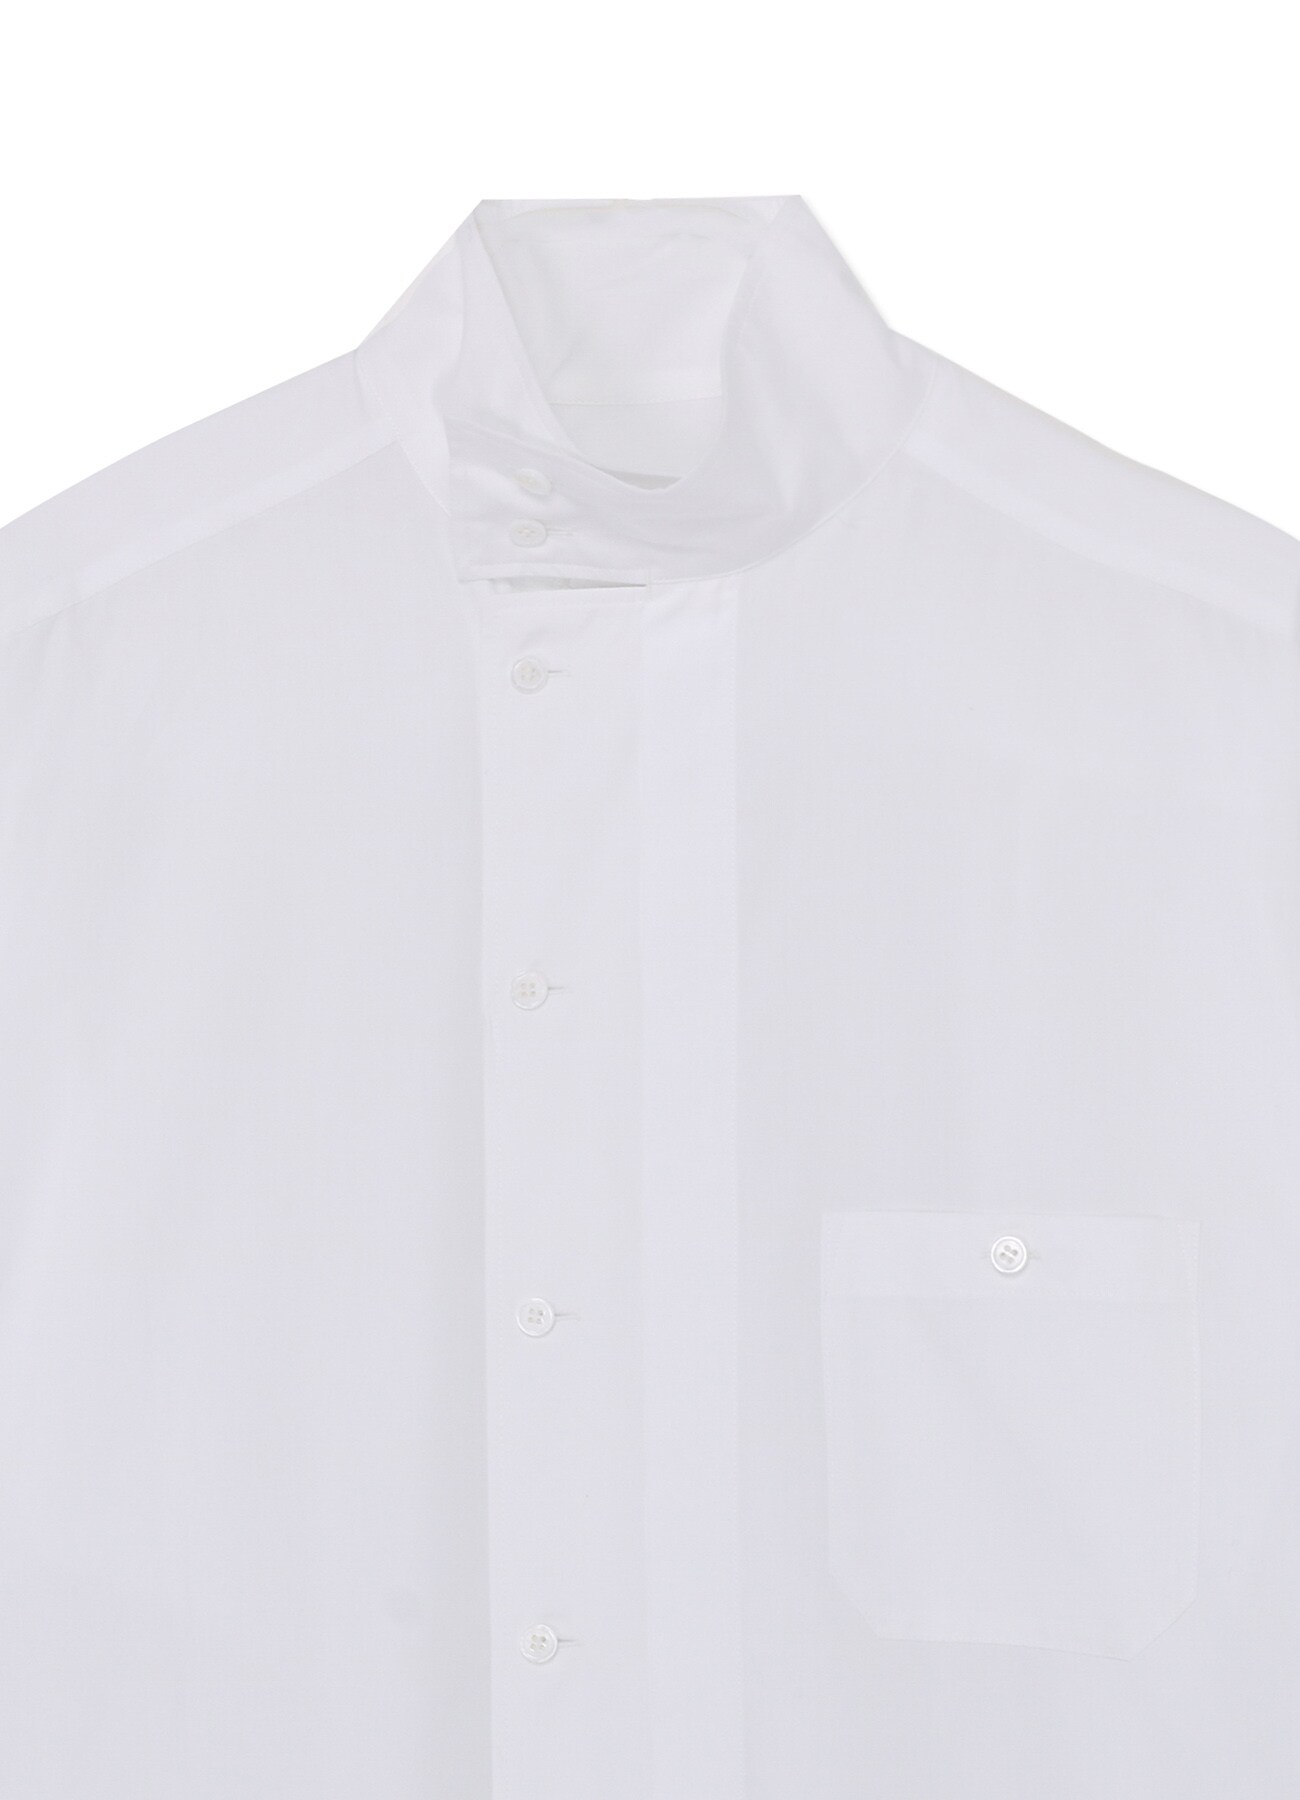 COTTON BROAD CLOTH STAND COLLAR SHIRT WITH DESIGN PLACKET(M White